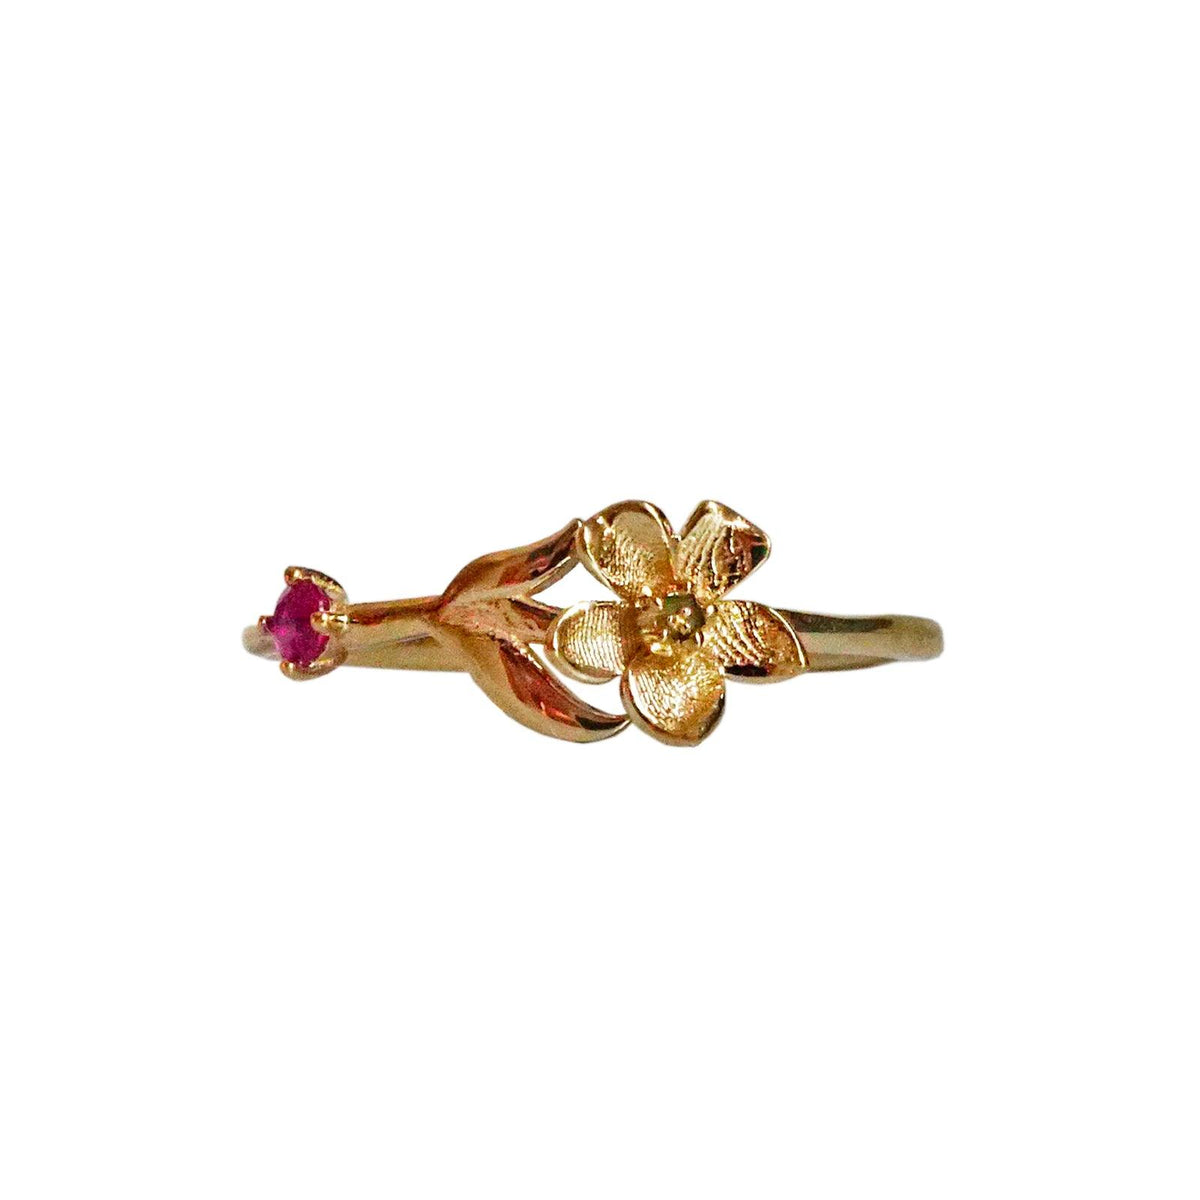 July birth flower ring in yellow gold